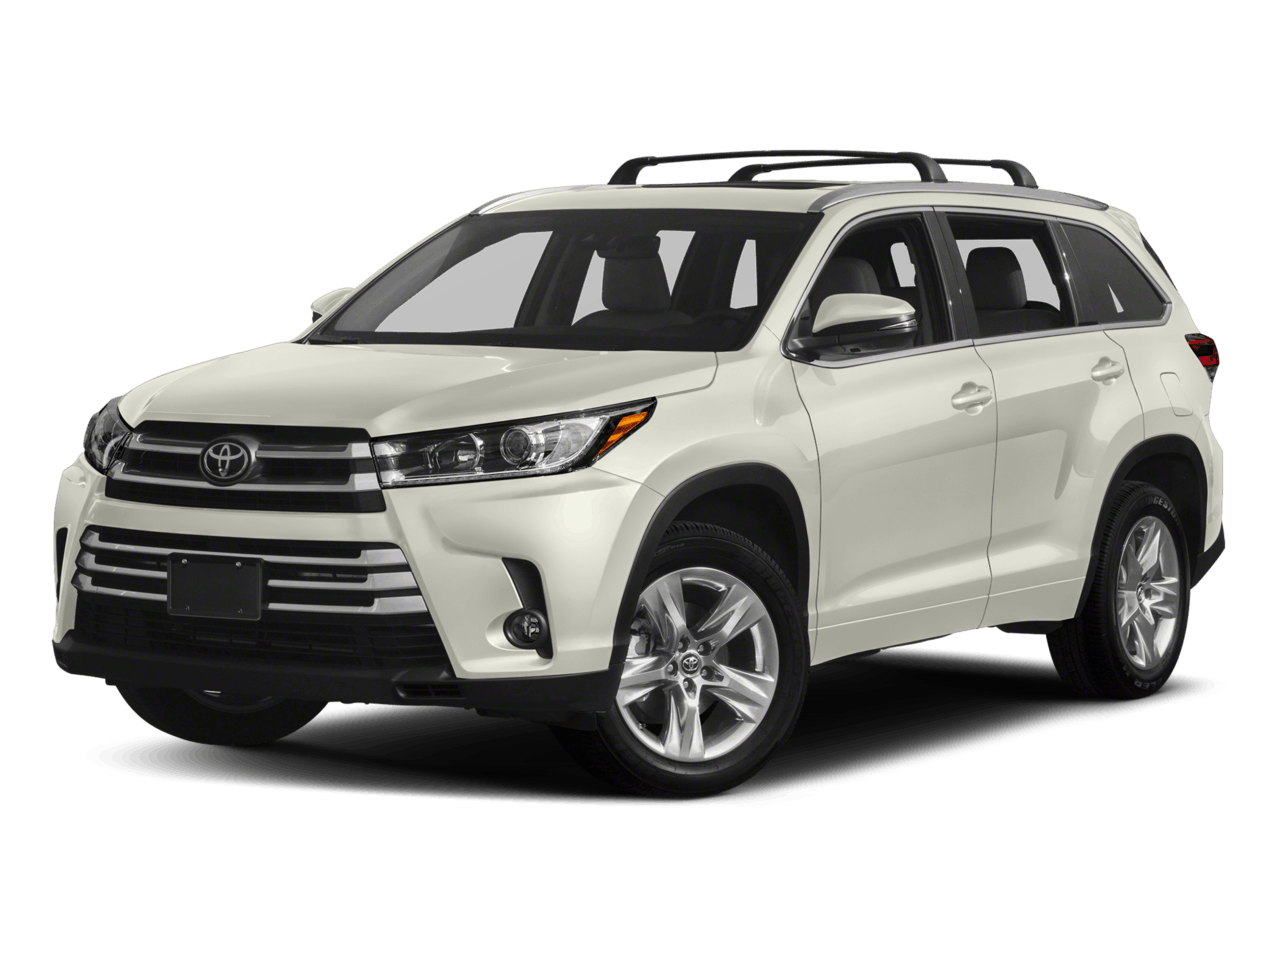 Used 2017 Toyota Highlander Limited with VIN 5TDDZRFH1HS398689 for sale in Waite Park, Minnesota